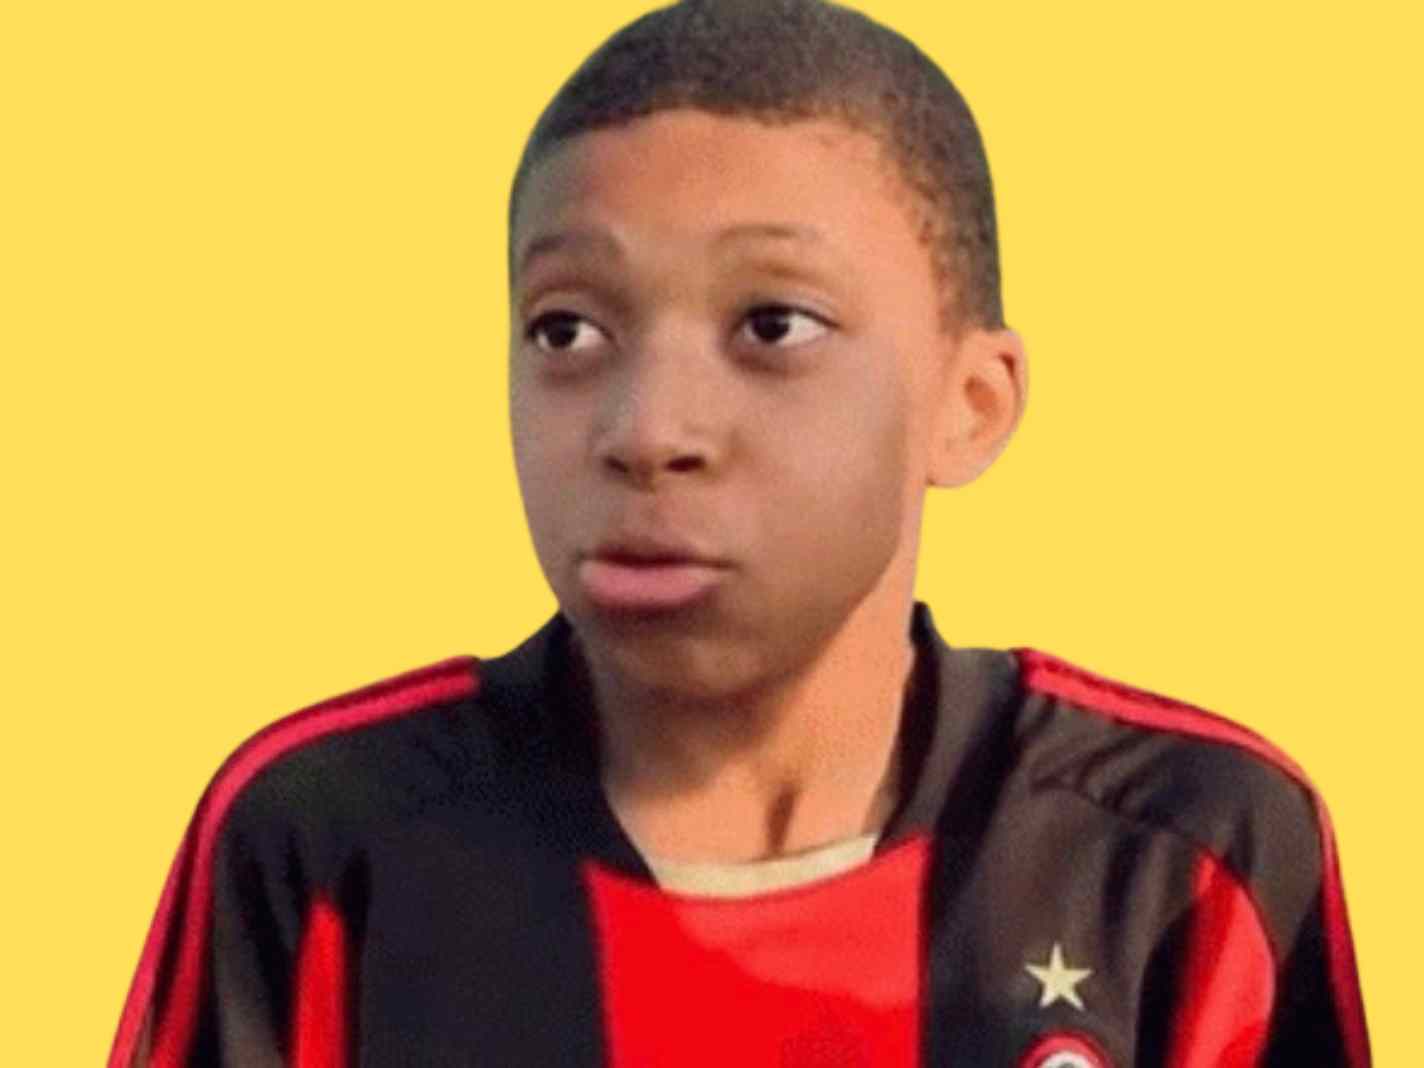 Do Milan legend Dida and Kylian Mbappe have any kind of connection?